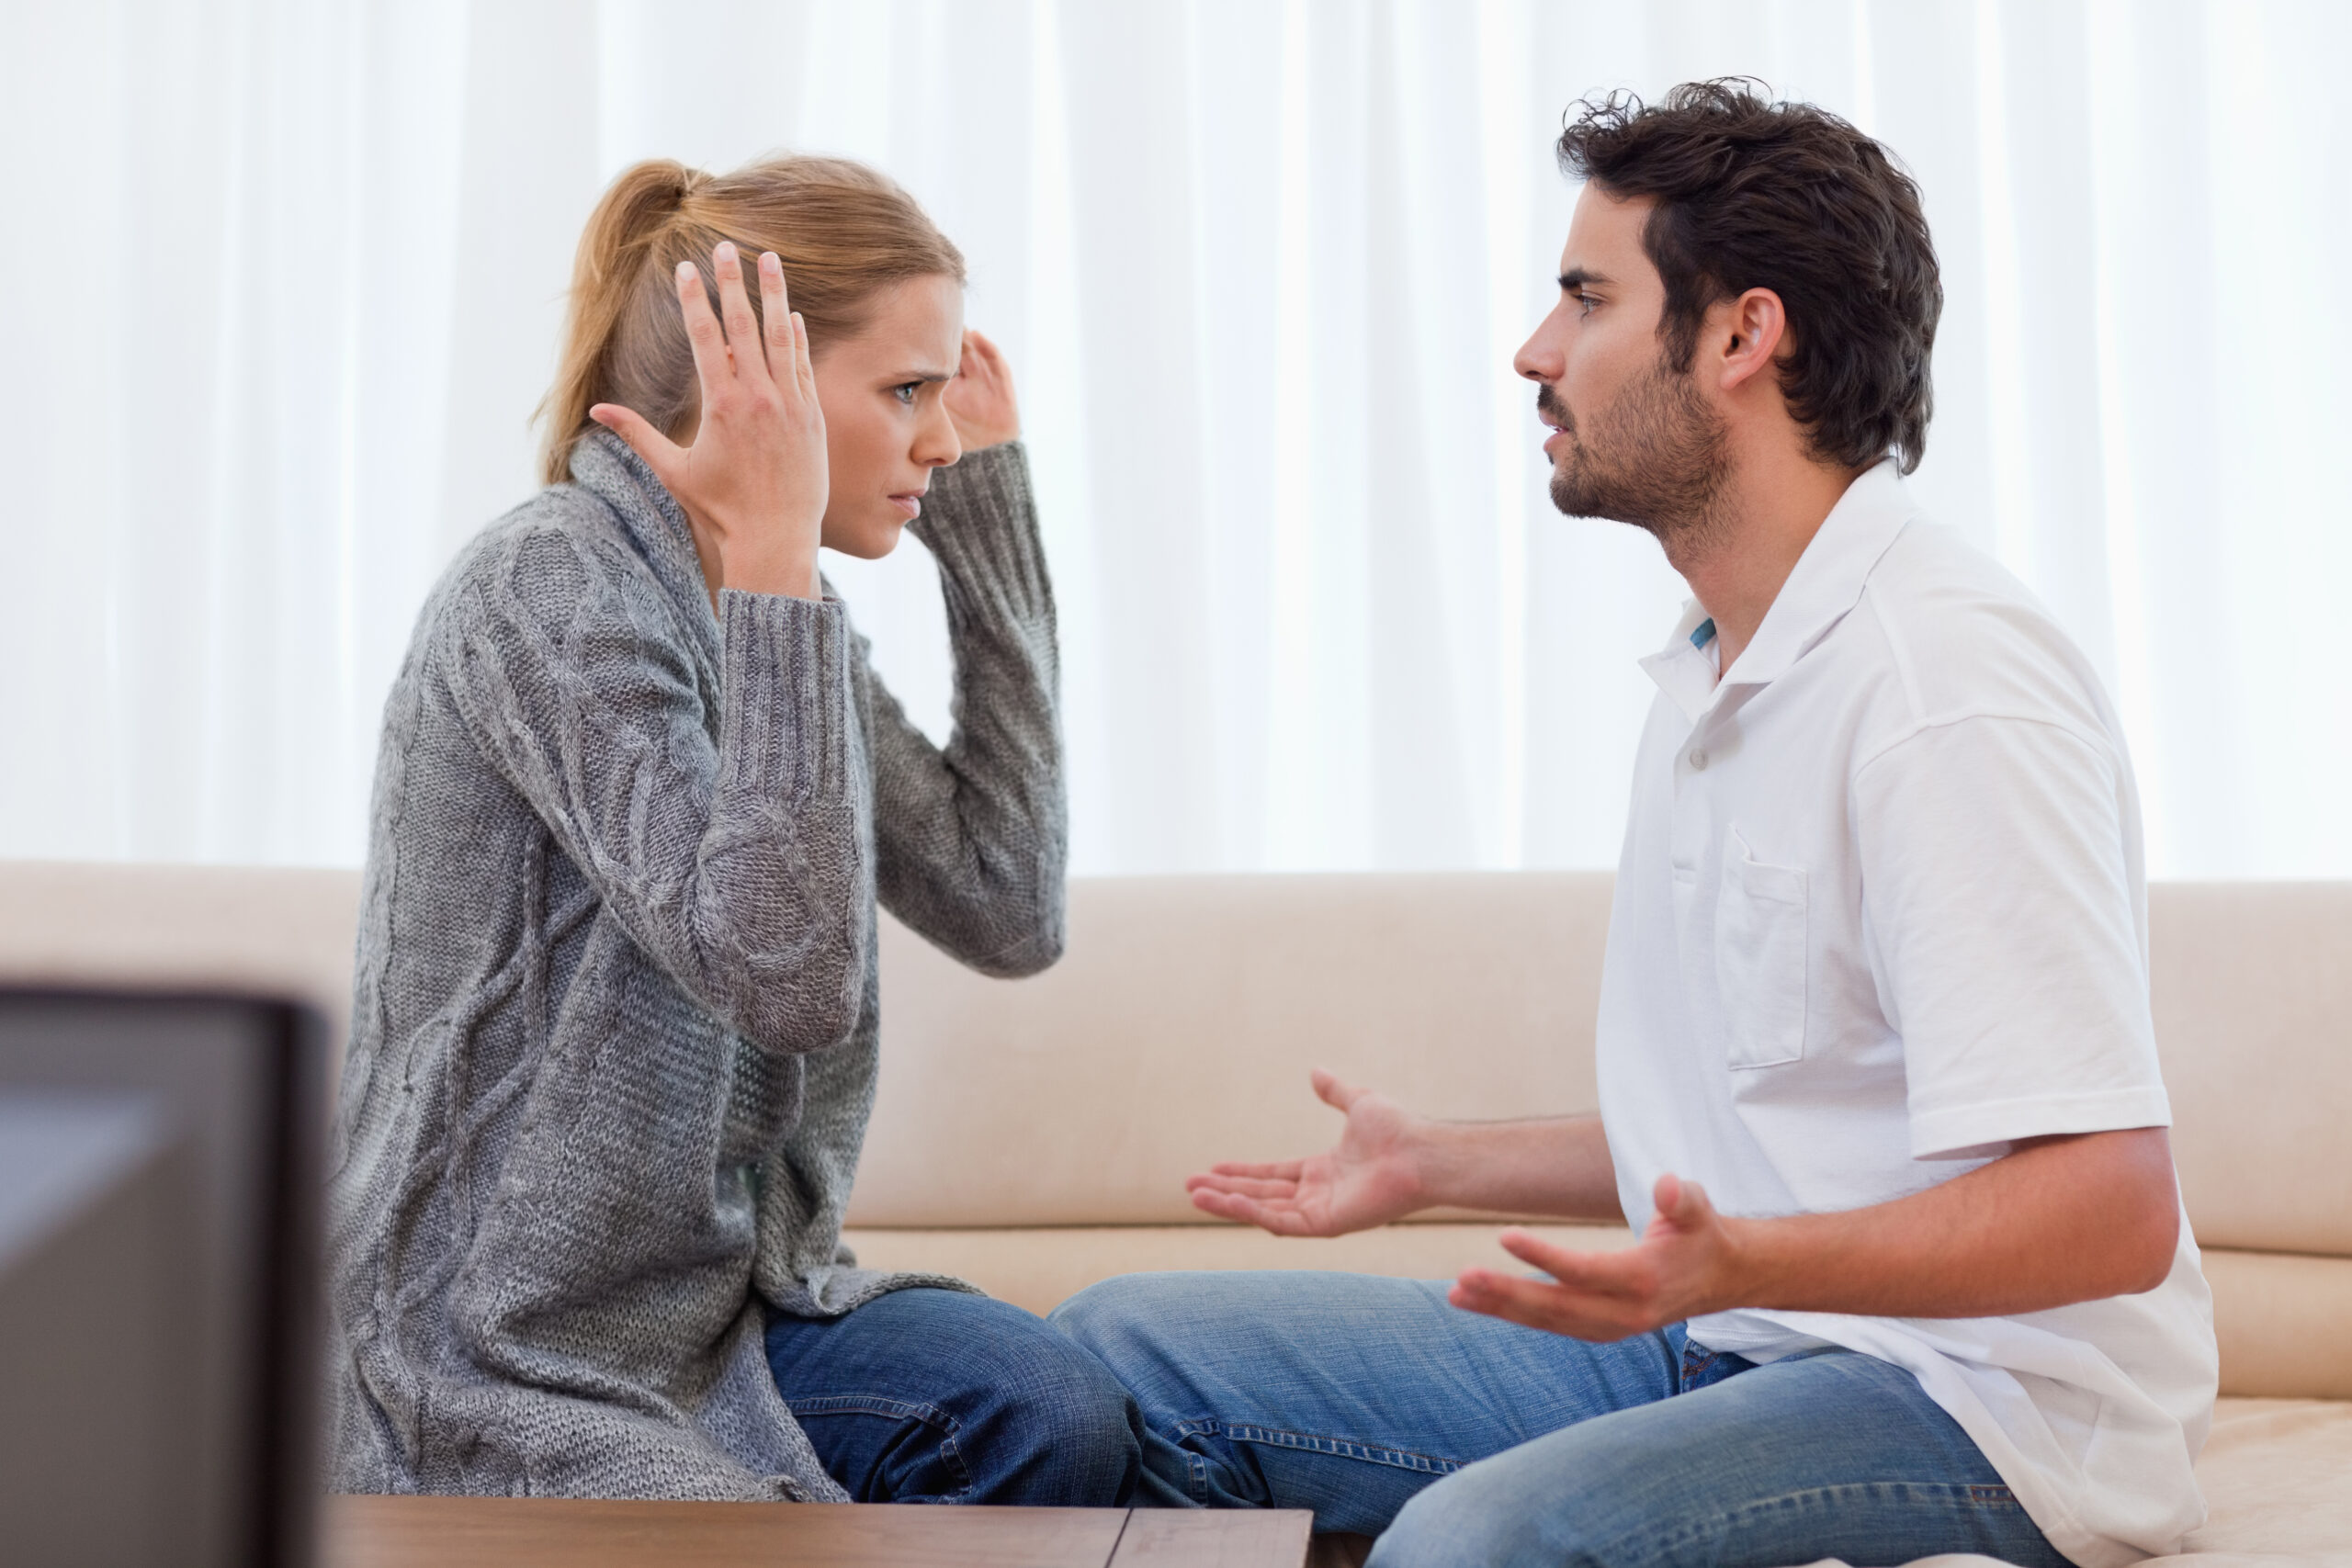 5 TIPS FOR RESOLVING ARGUMENTS WITH YOUR WIFE